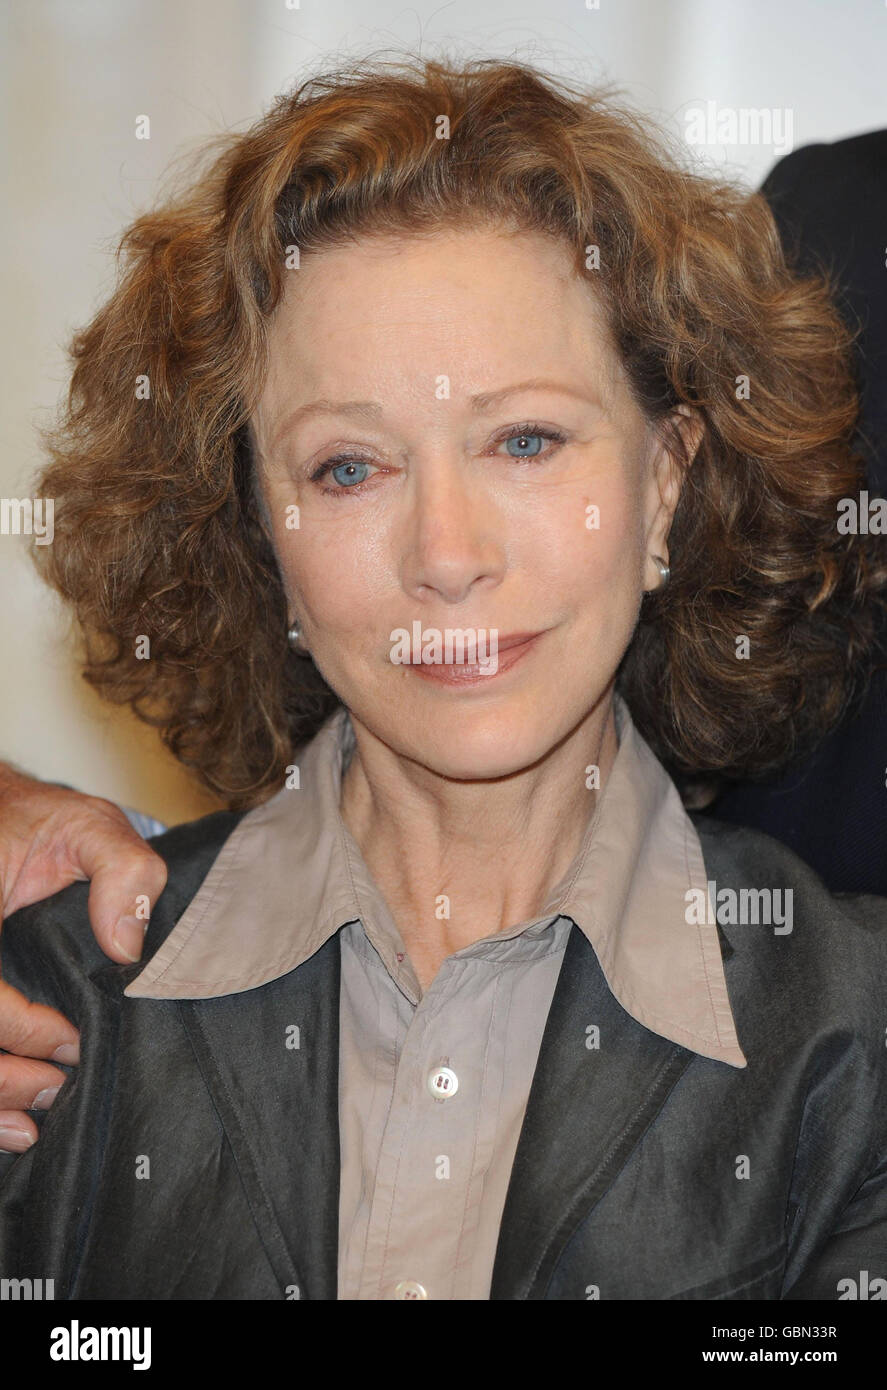 Connie booth images